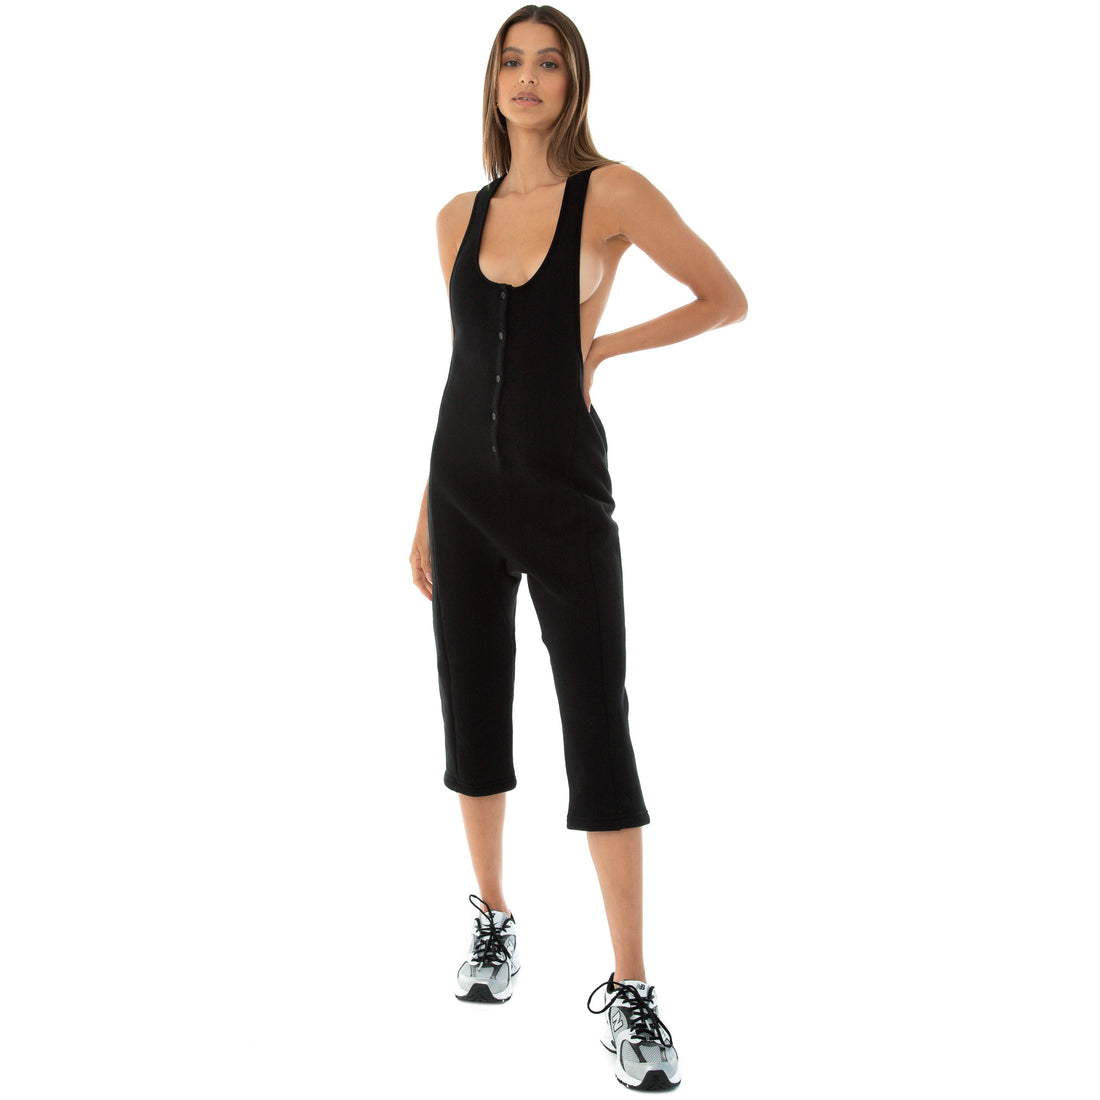 Are You Am I - Sikka Jumpsuit **black